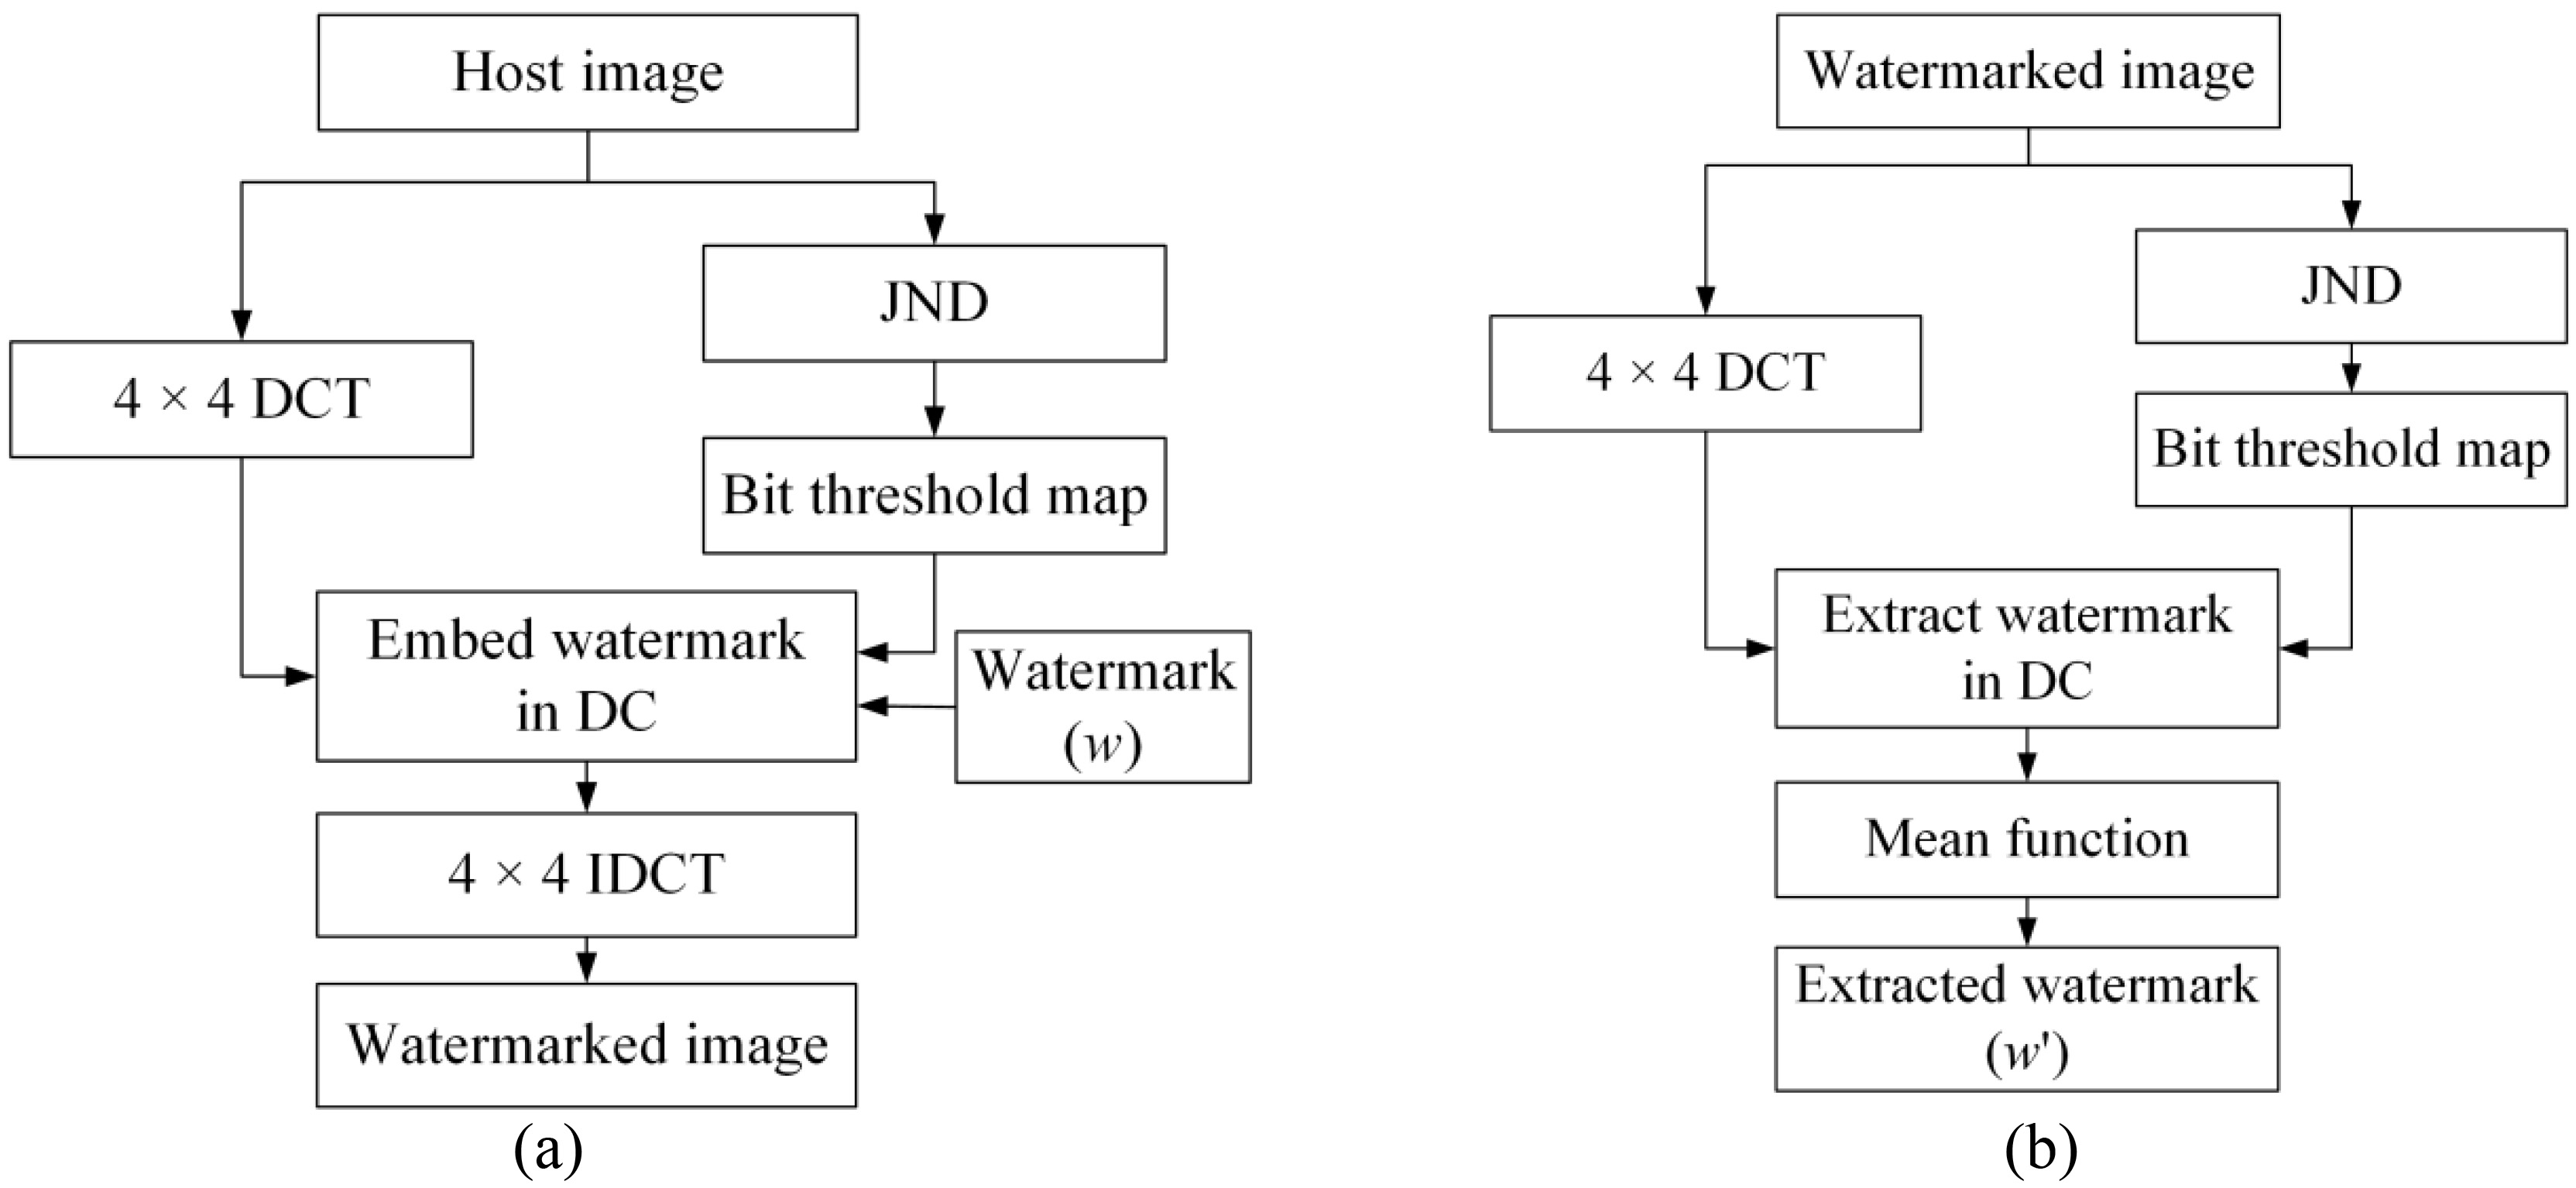 Block diagram of the proposed medical image watermarking process: (a) embedding process, (b) detecting process.